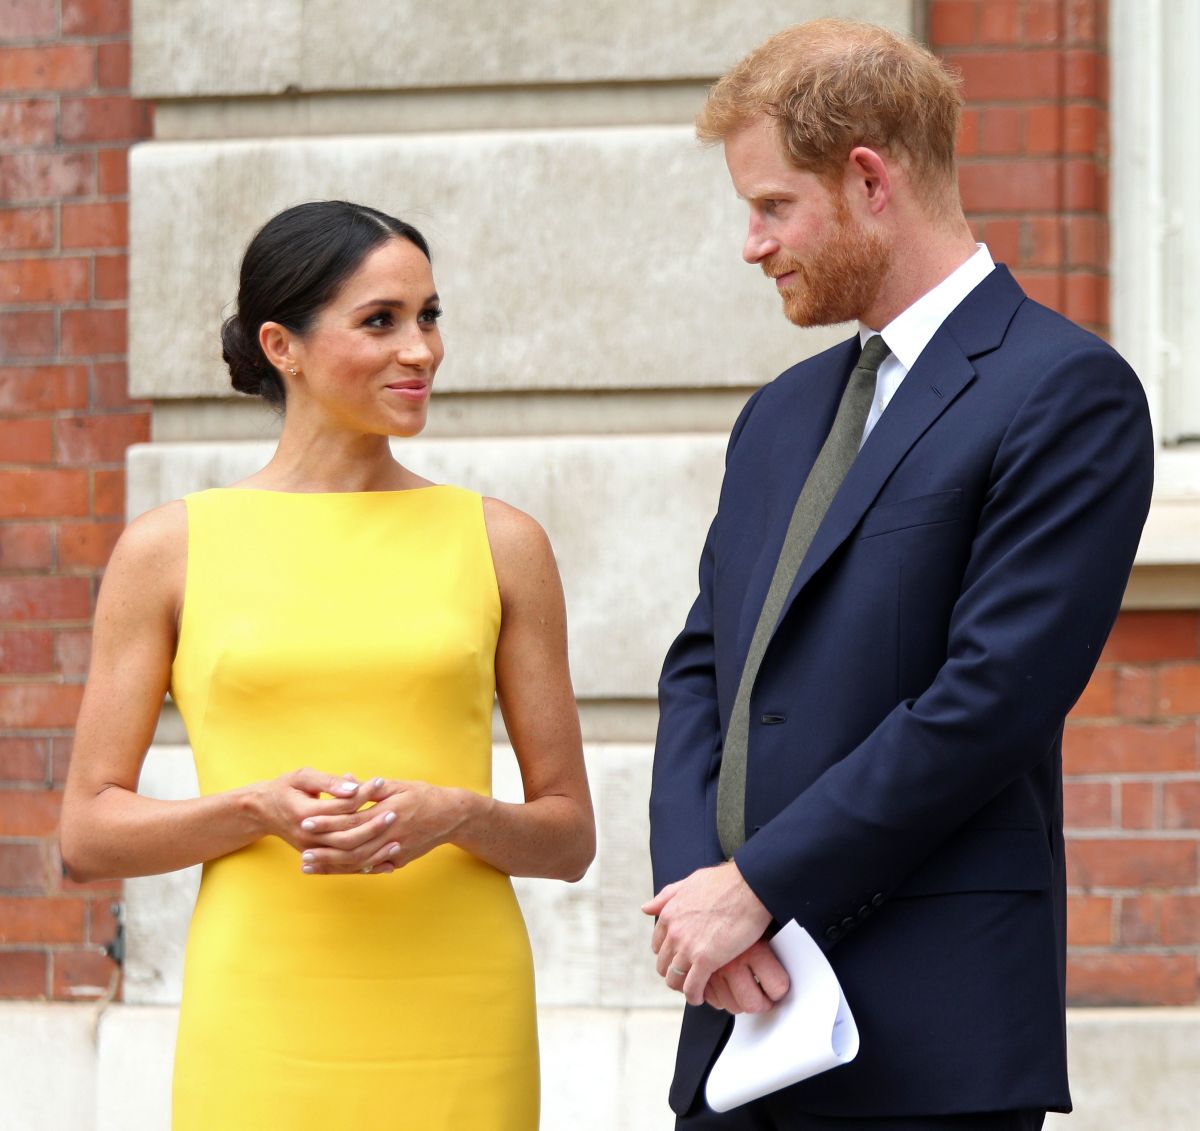 Prince Harry, Duke of Sussex, and Meghan, Duchess of Sussex arrive to attend a reception marking the culmination of the Commonwealth Secretariats Youth Leadership Workshop in London. Photo: Yui Mok/AFP/Getty Images